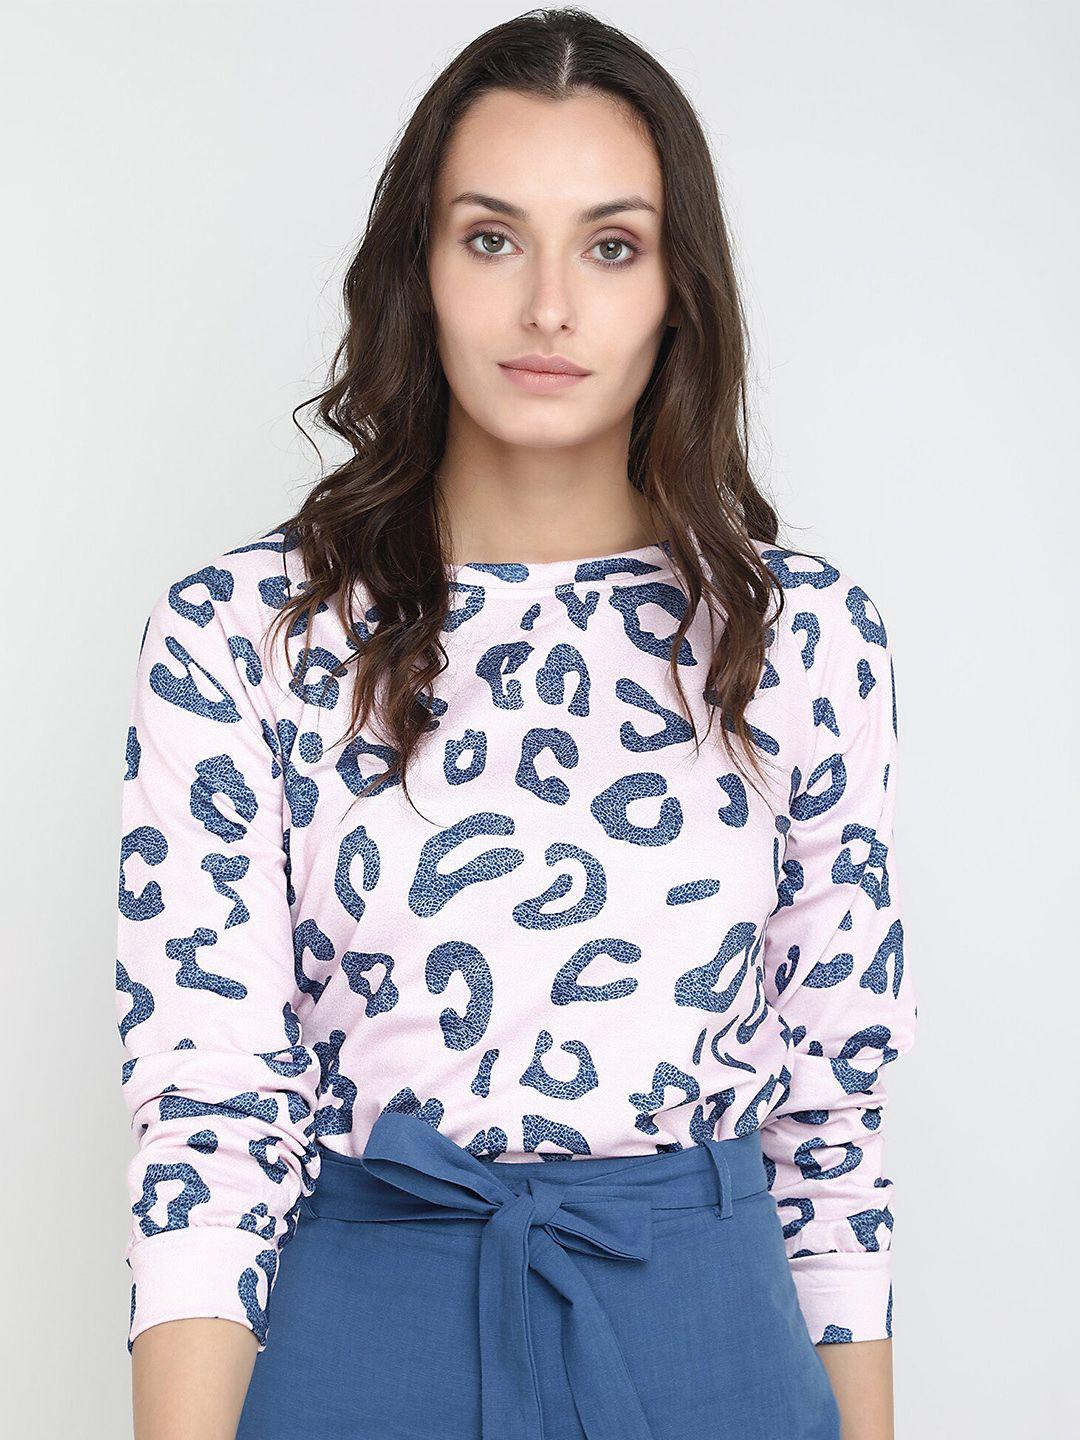 lulu & sky abstract printed round neck long sleeves pullover sweater